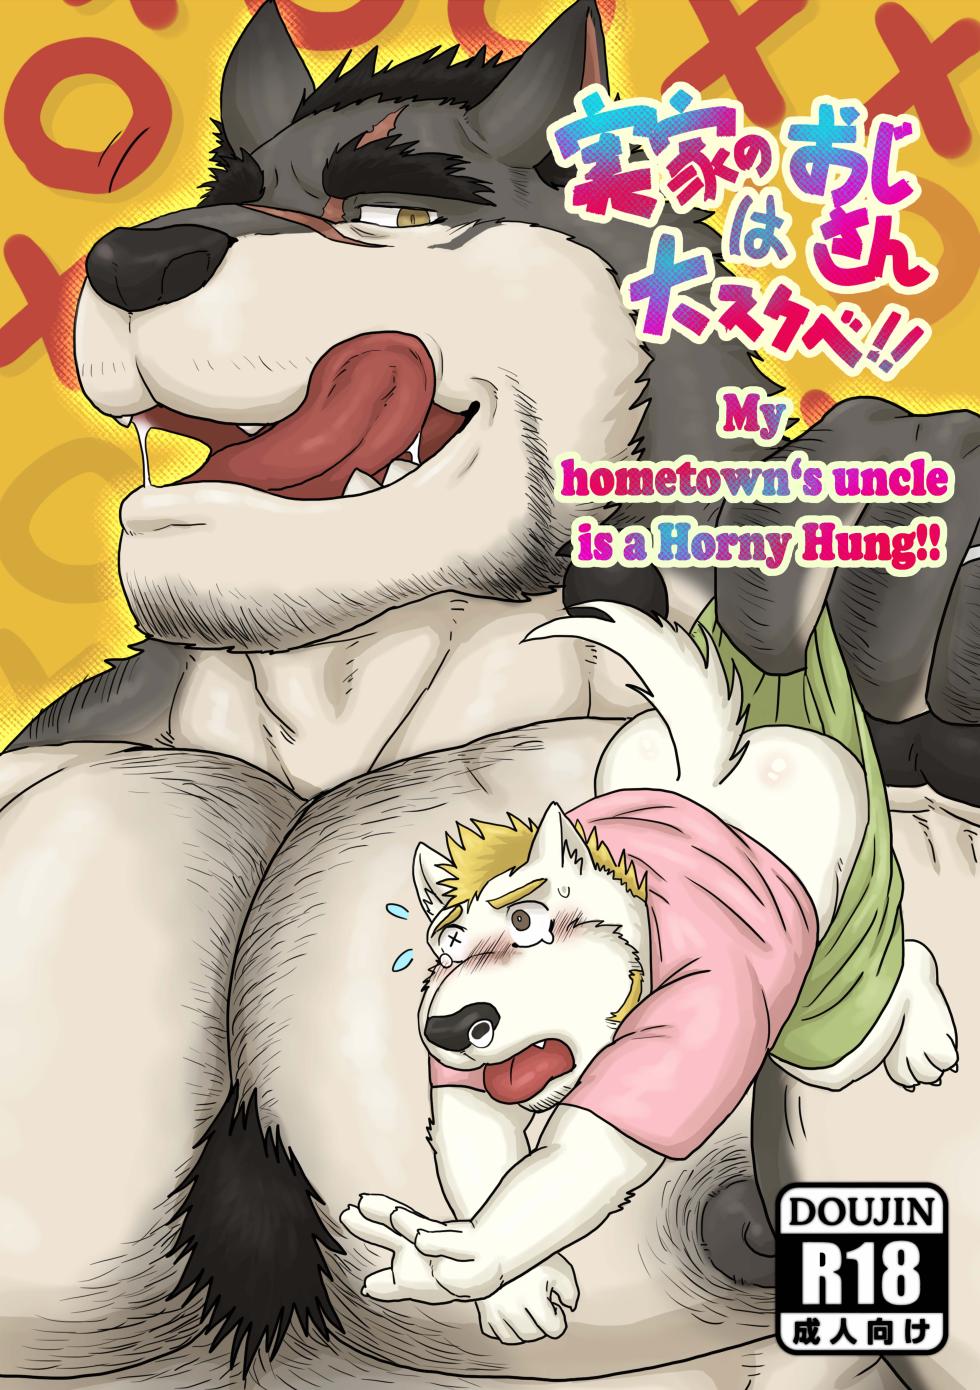 [Renoky] Jikka no Ossan wa Daisukebe!! | My hometown‘s uncle is a Horny Hung!! [English] [Decensored] [Digital] - Page 1